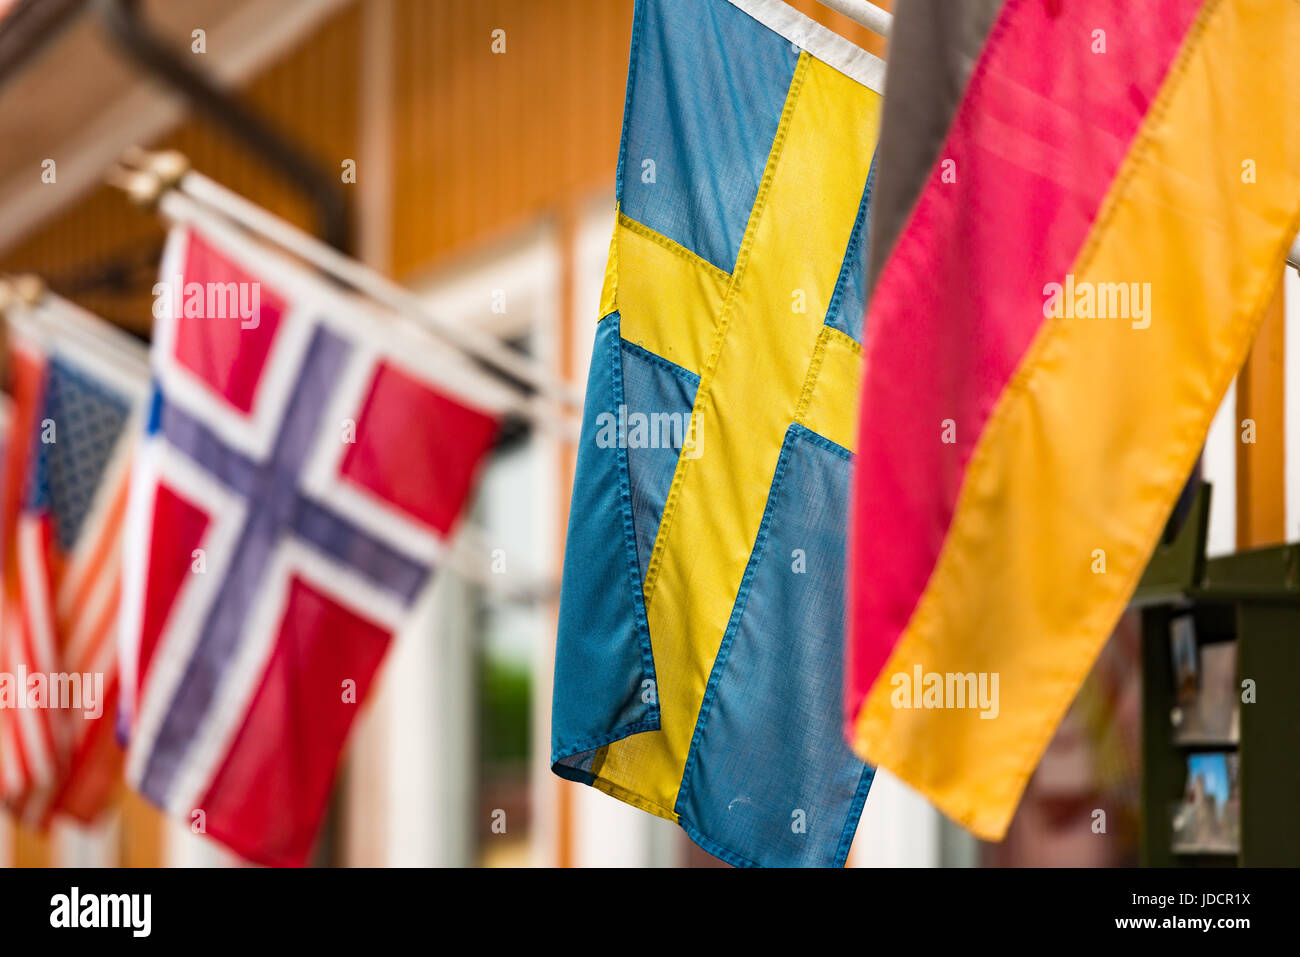 Many flags on wall of building in old town Sigtuna. Europe travel. Sweden, Scandinavia. Stock Photo